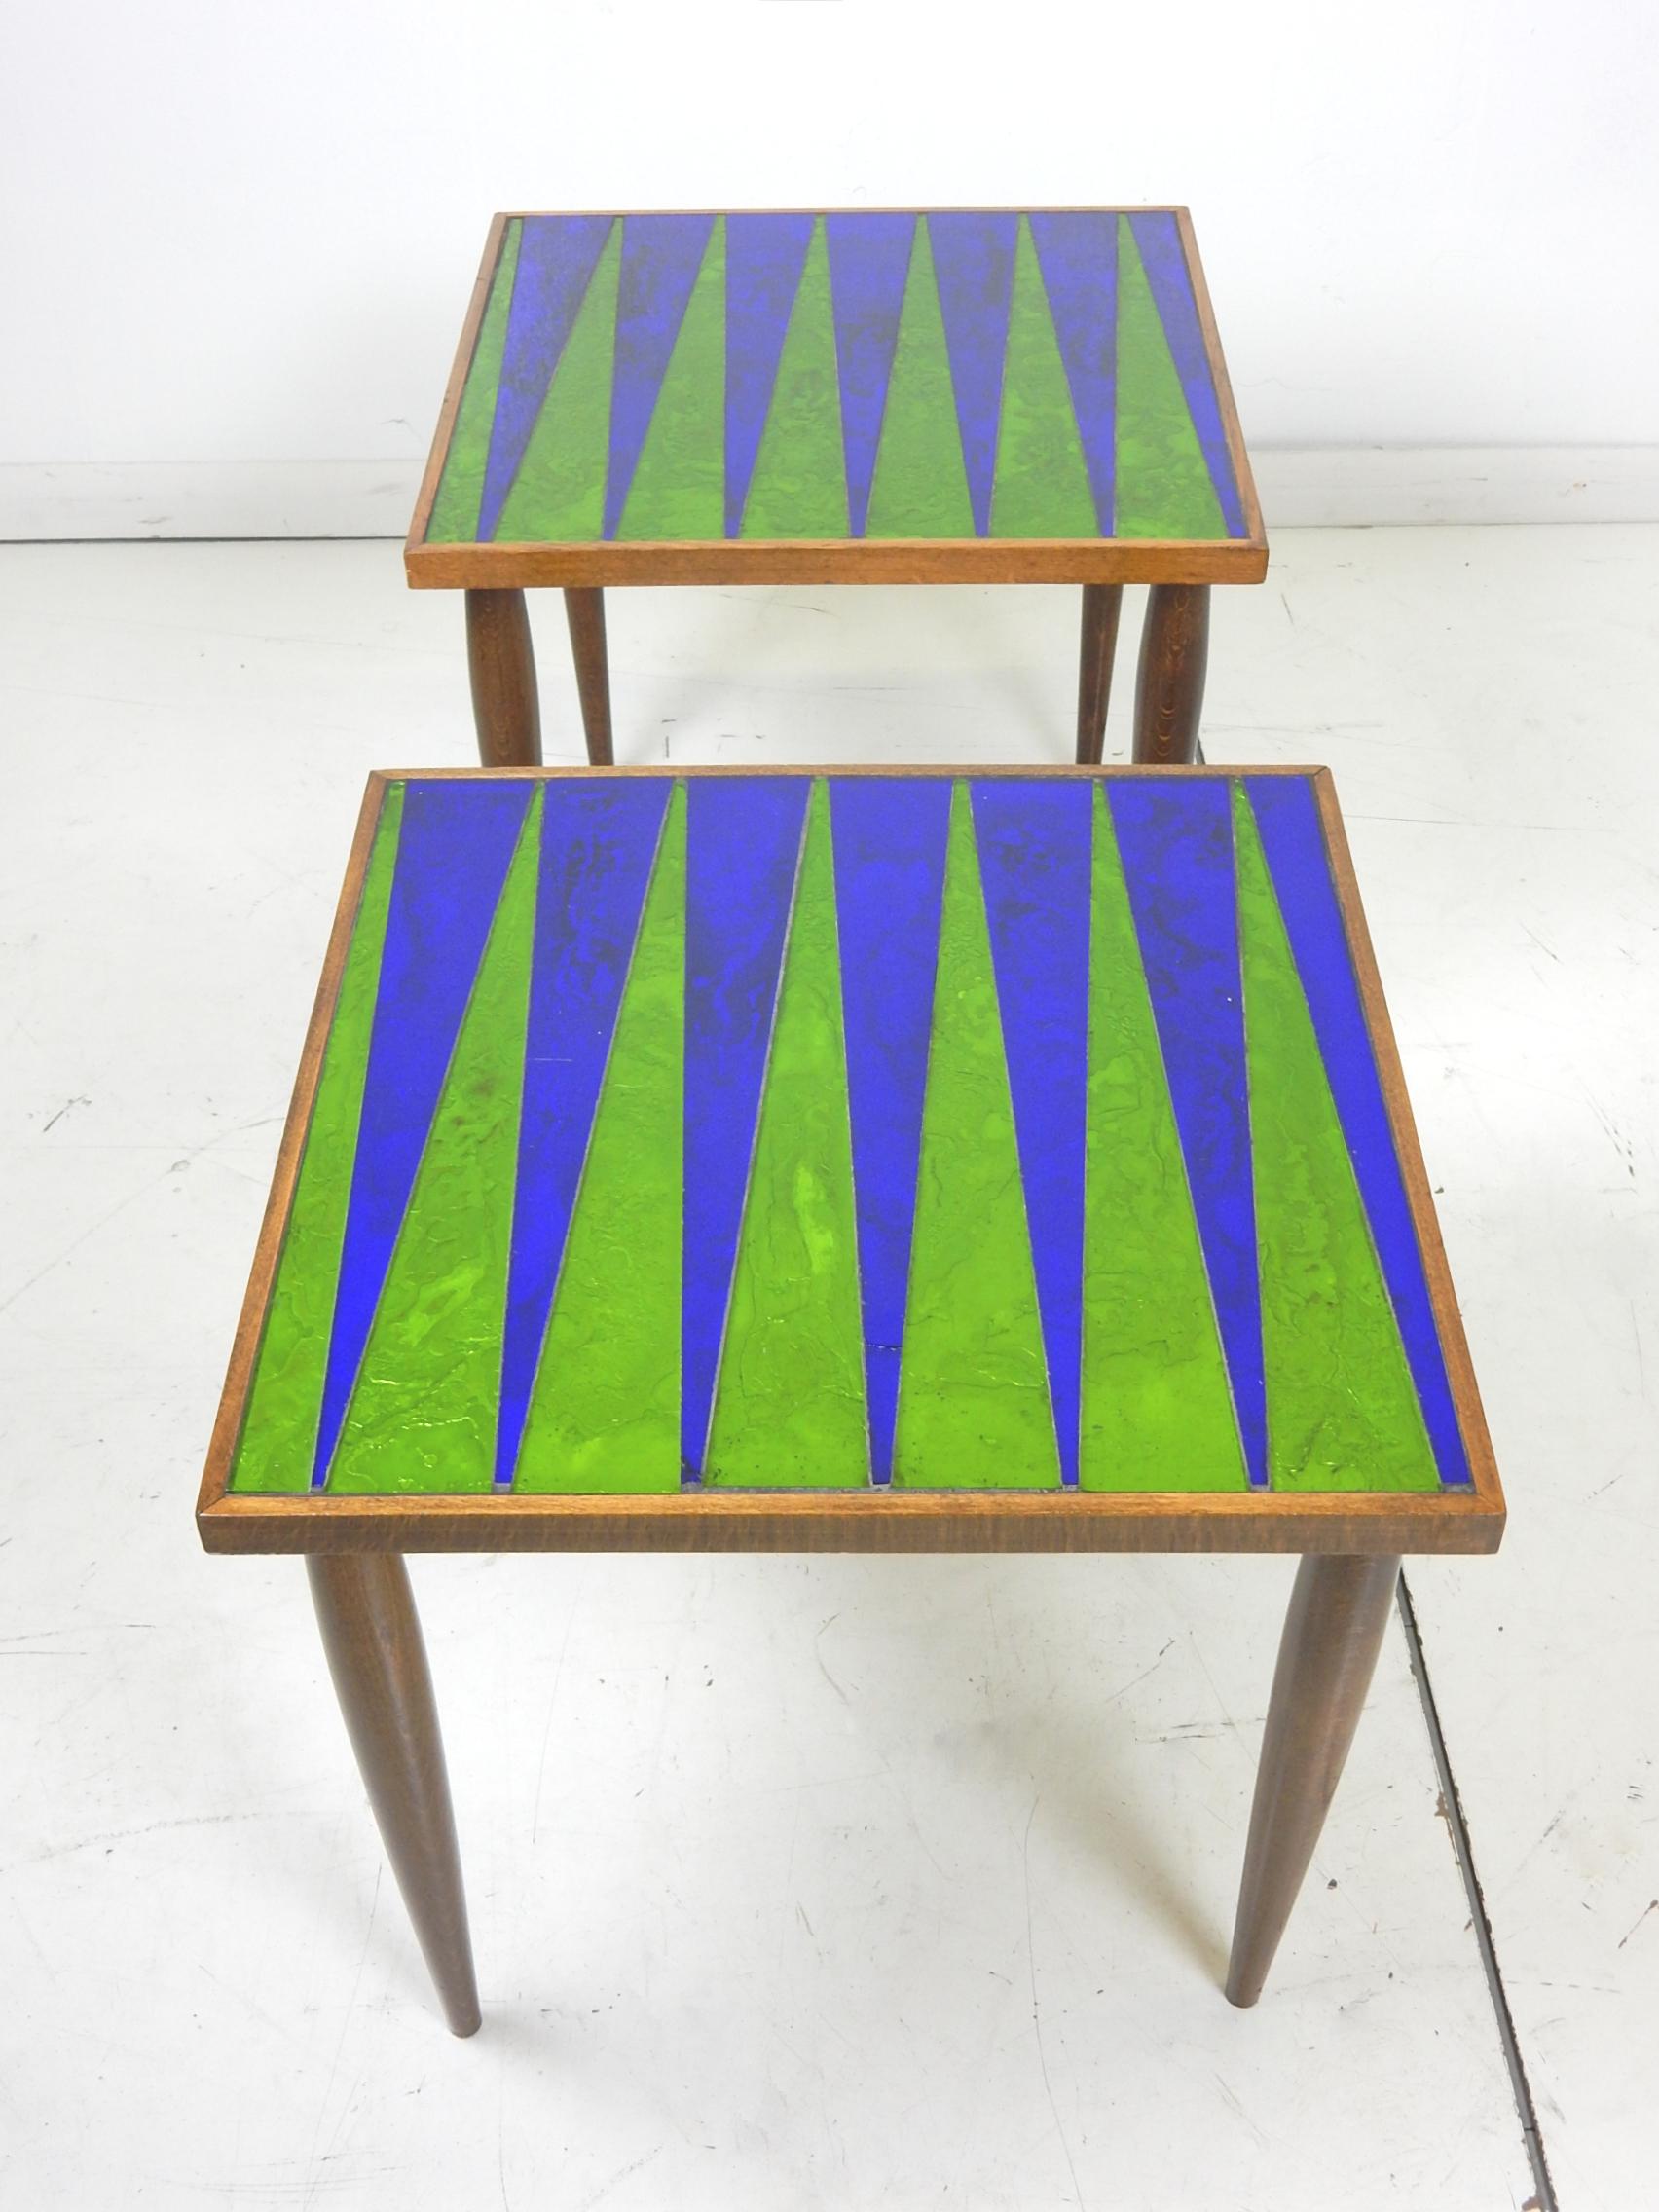 Mid Century era Georges Briard designed glass mosaic side tables.
Gorgeous blue and green glass top framed in walnut with matching tapered legs.
Both are in excellent condition showing very little wear or use.